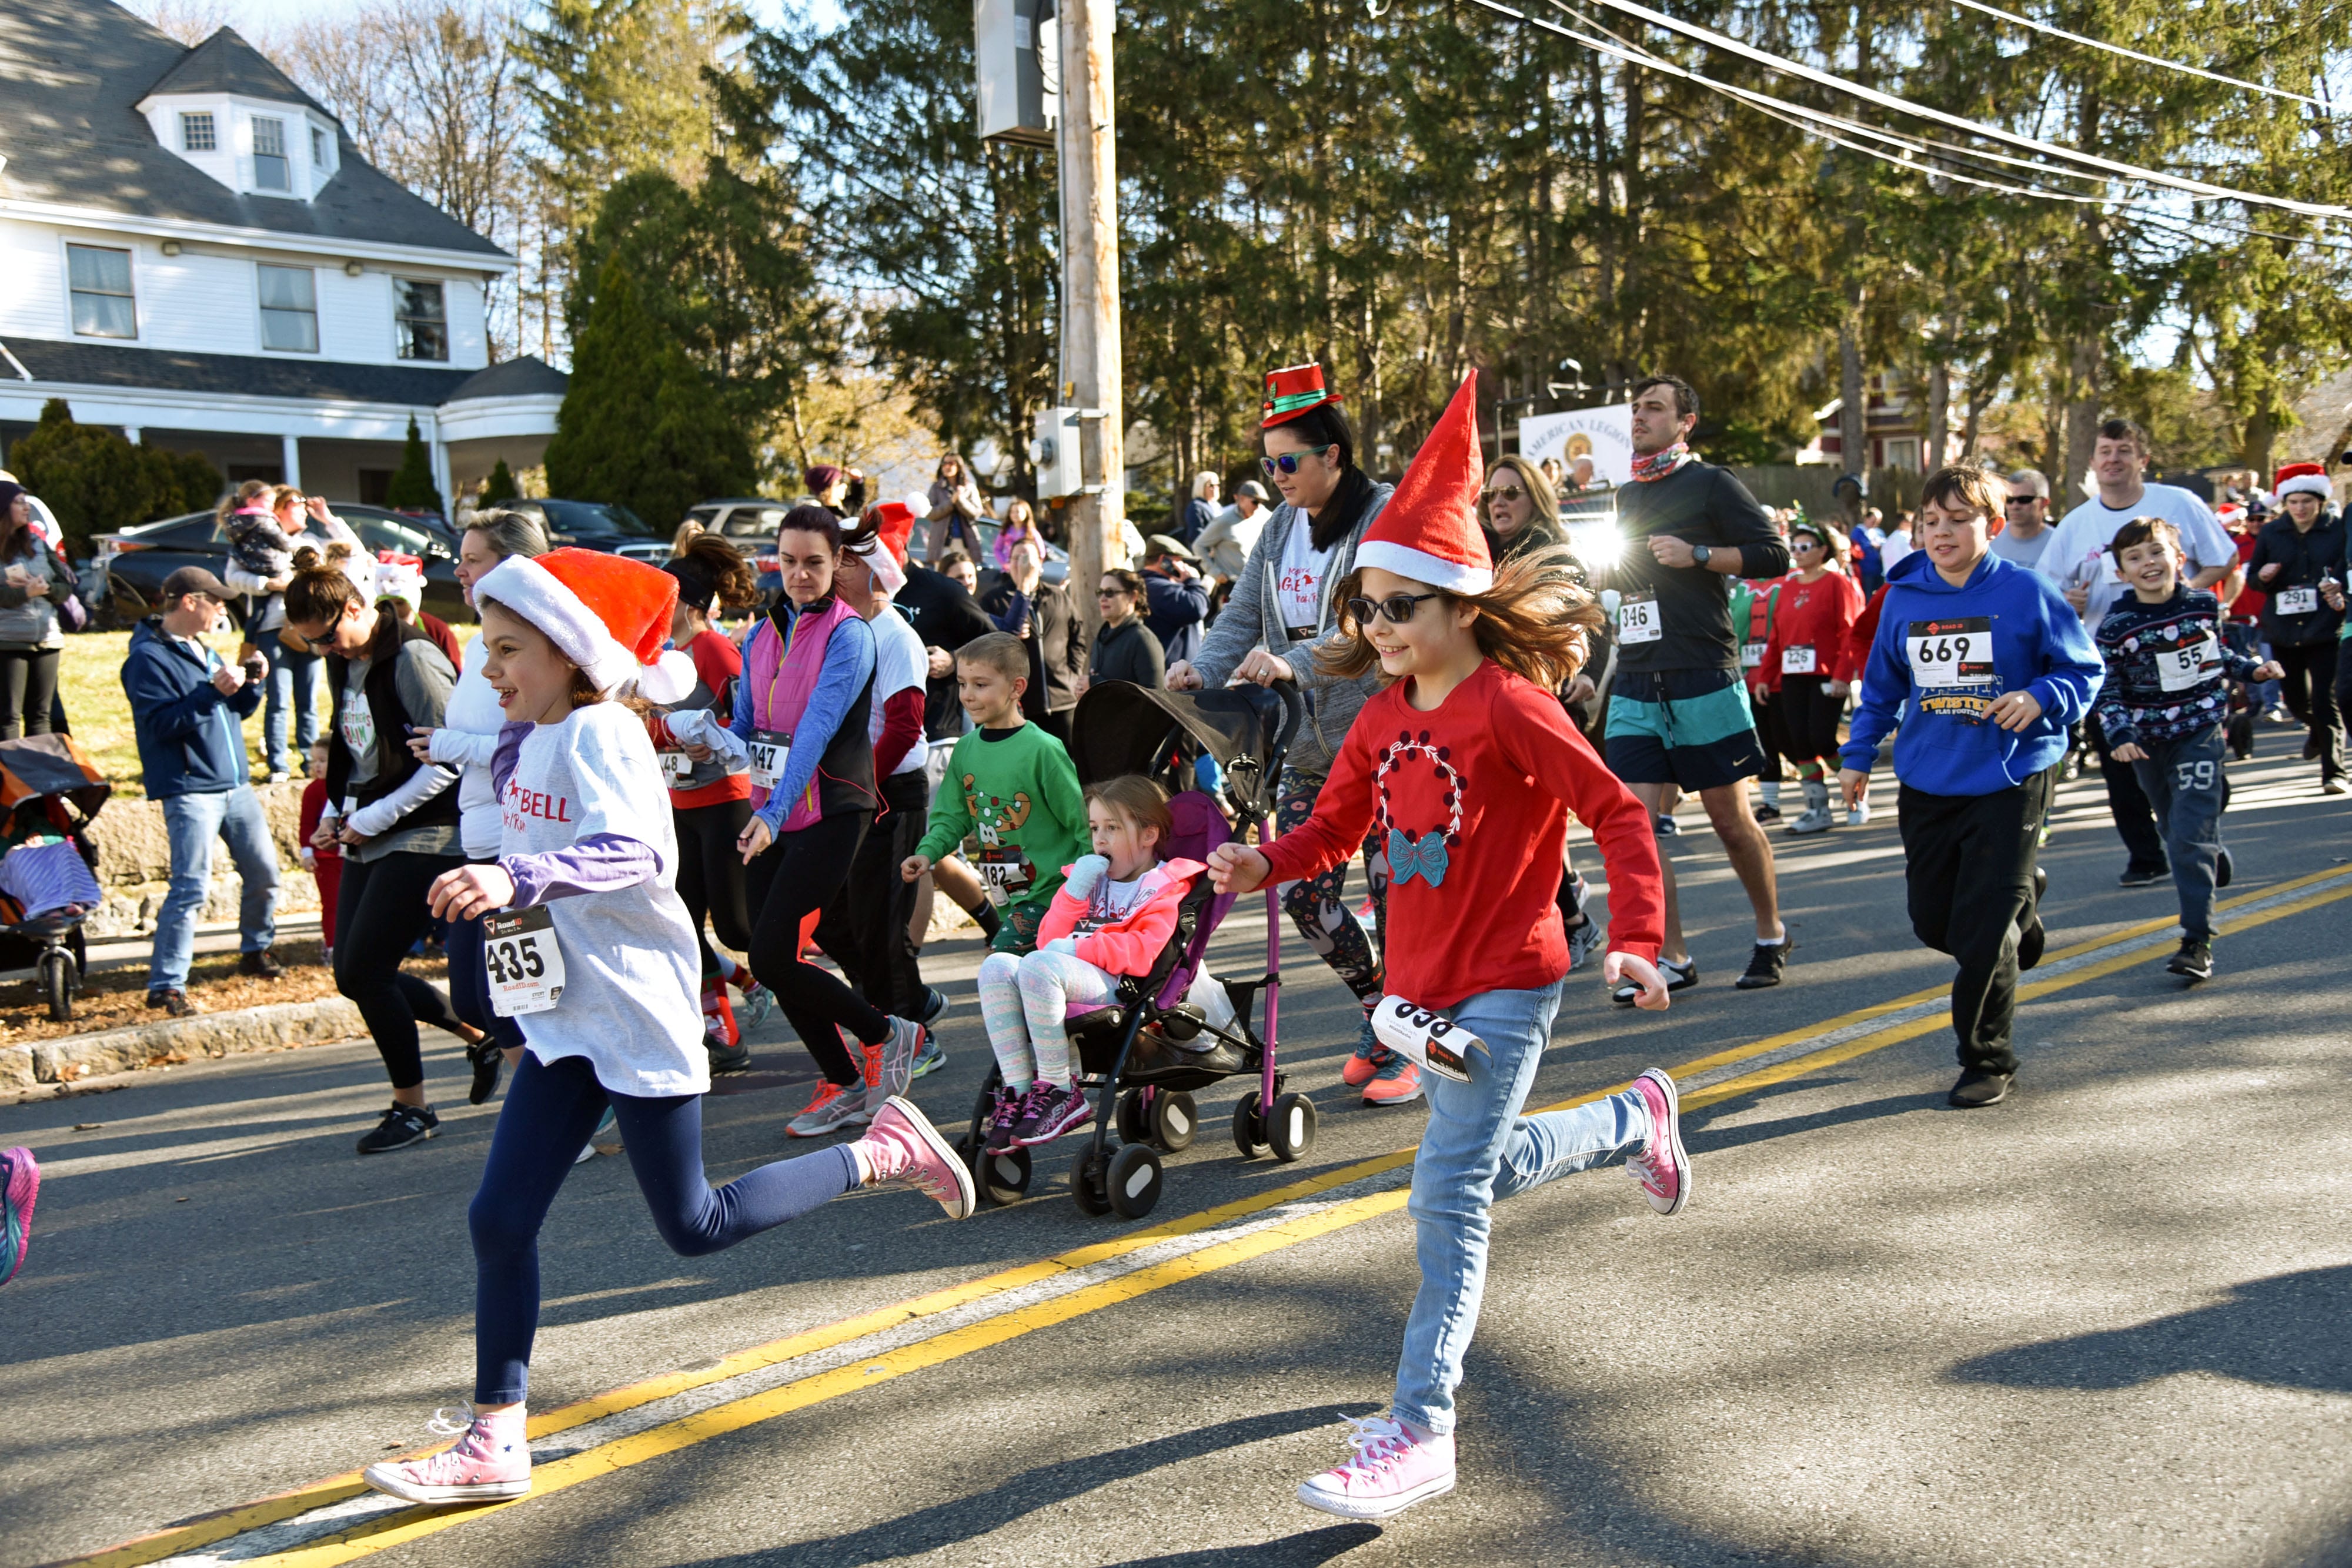 Hundreds of families and friends participated in the fifth annual Jingle Bell 5K Run/Walk on November 25 to raise money for Medford schools.